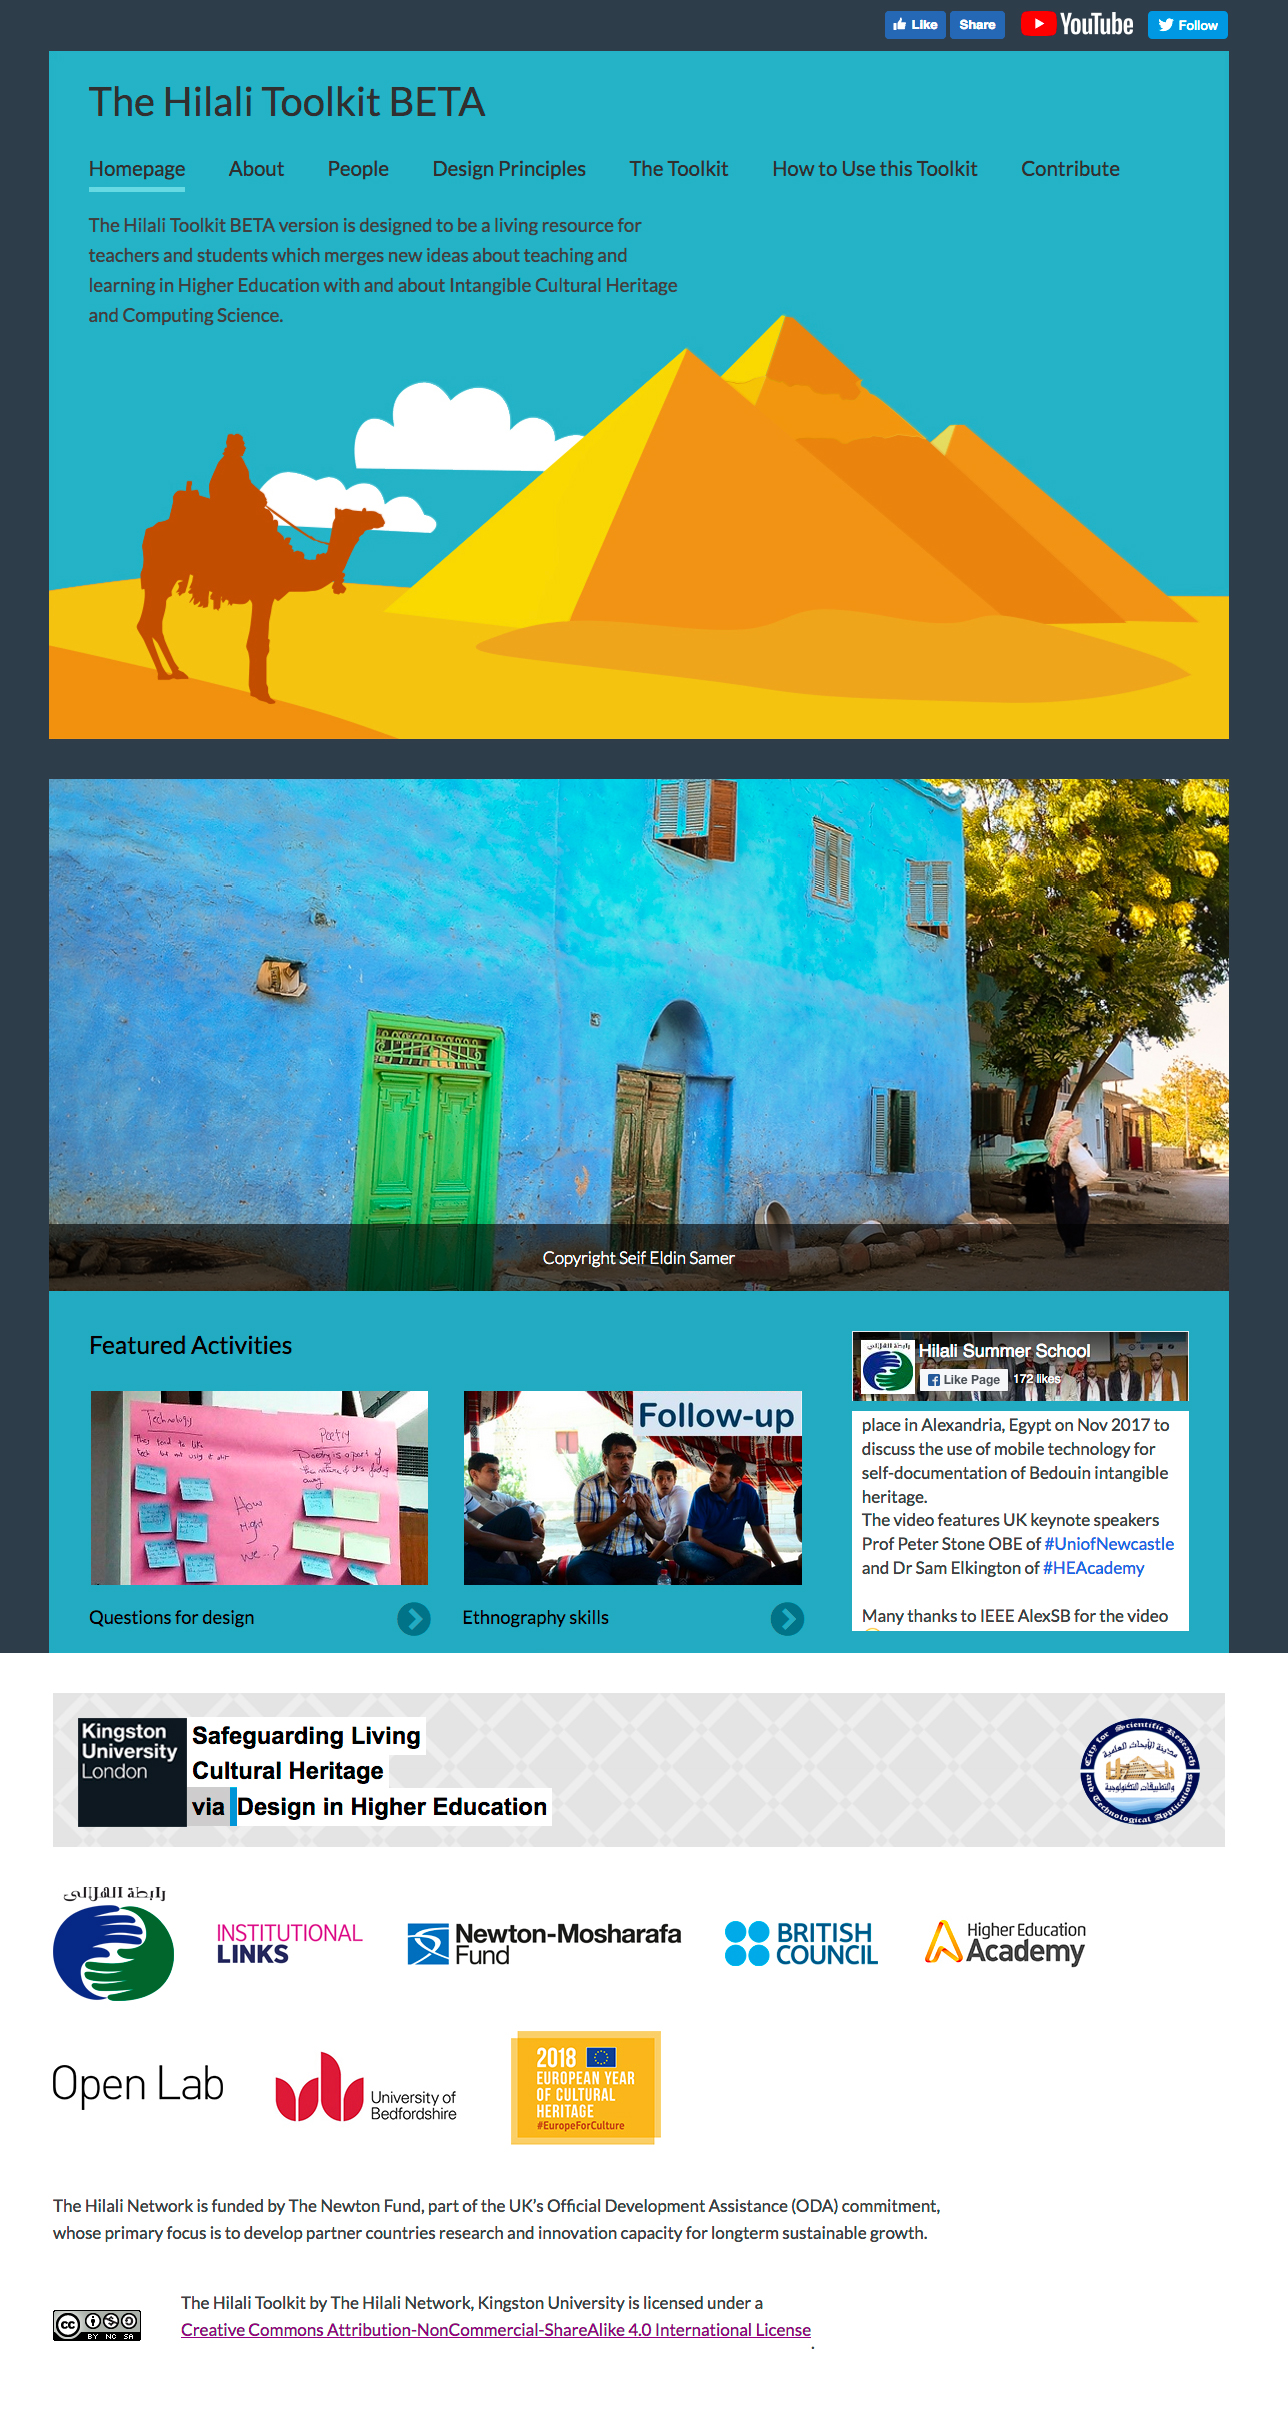 Hilali toolkit website screenshot including illustration of camel in front of pyramids and photo of blue house